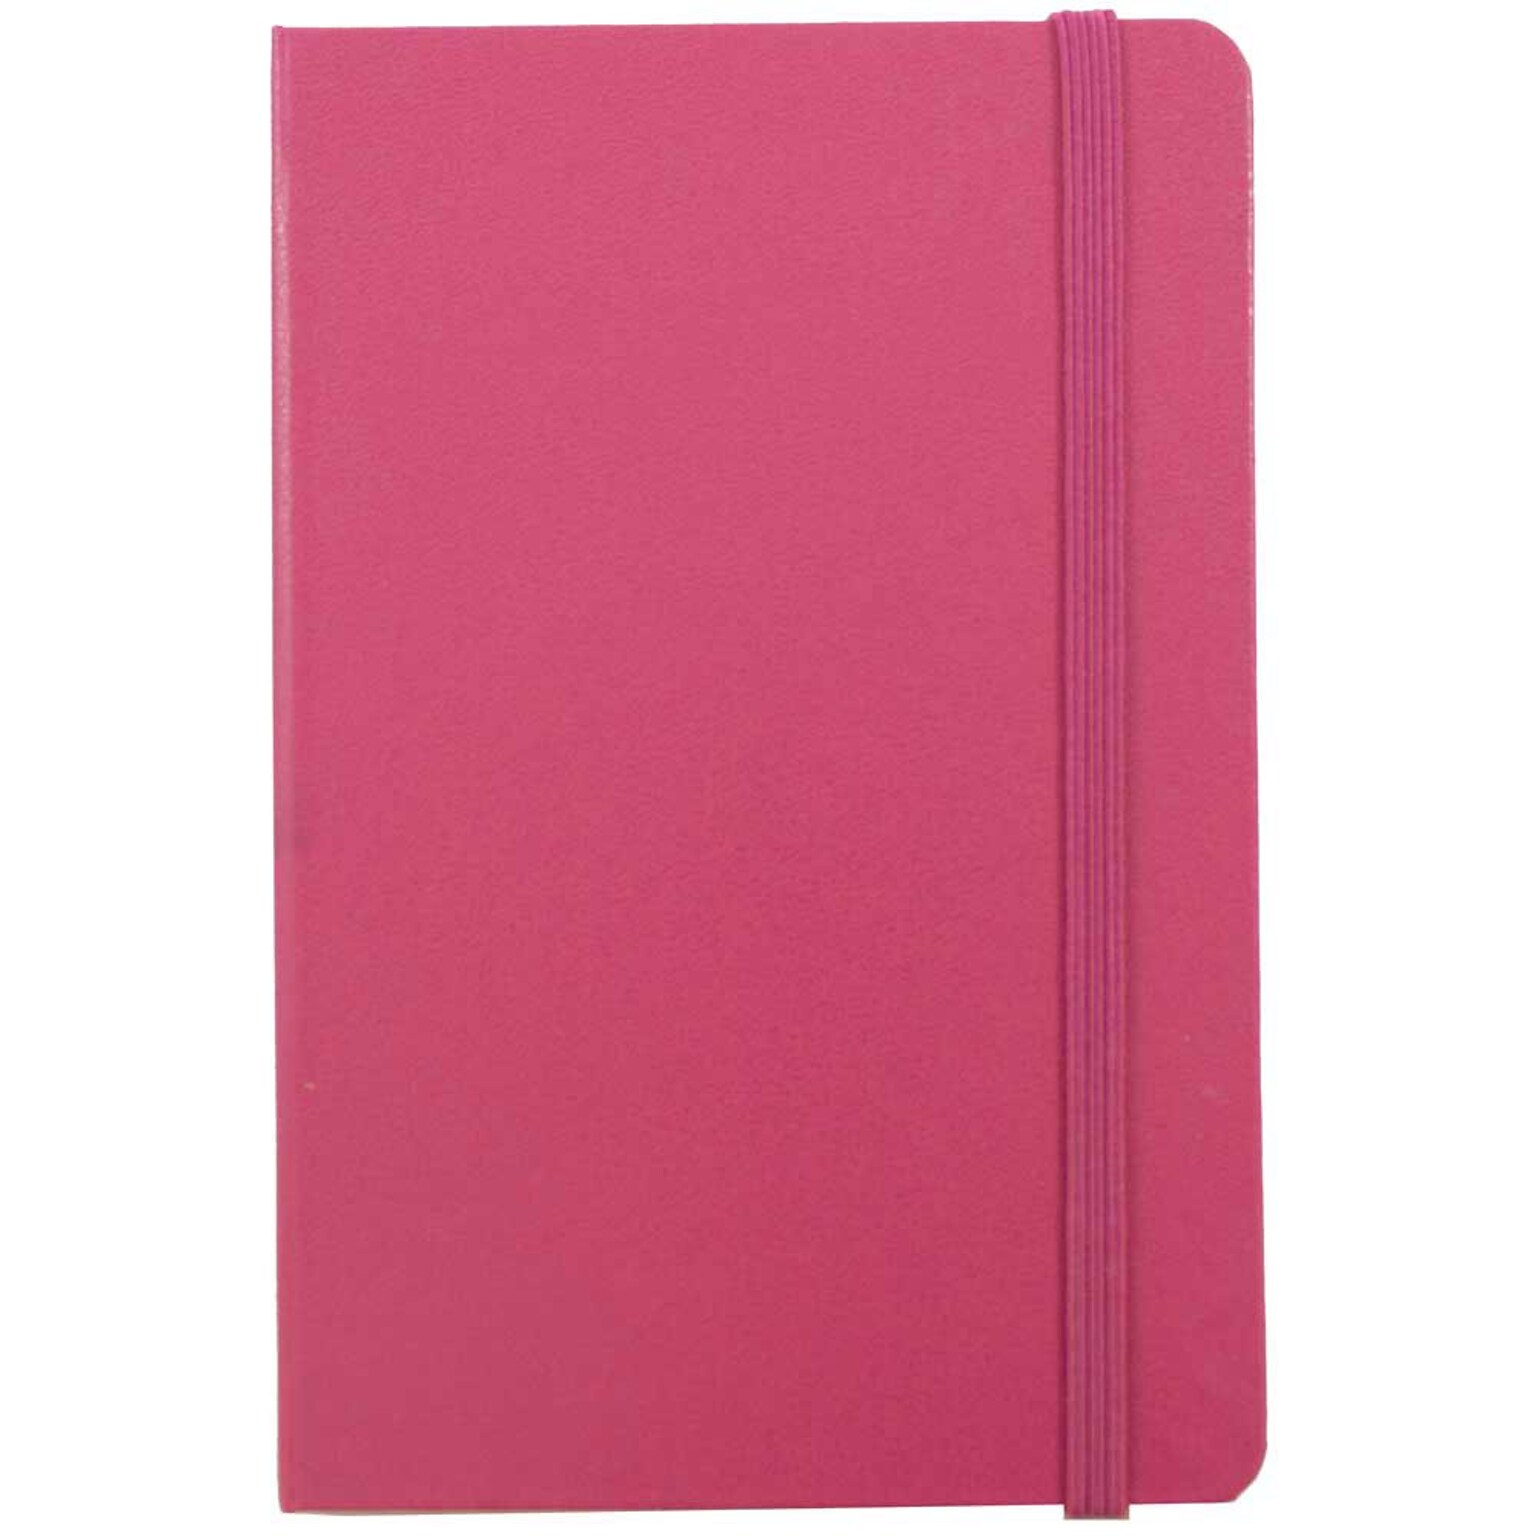 JAM Paper® Hardcover Lined Notebook with Elastic Closure, Large, 5 7/8 x 8 1/2 Journal, Pink Berry, 1/pk (340528856)